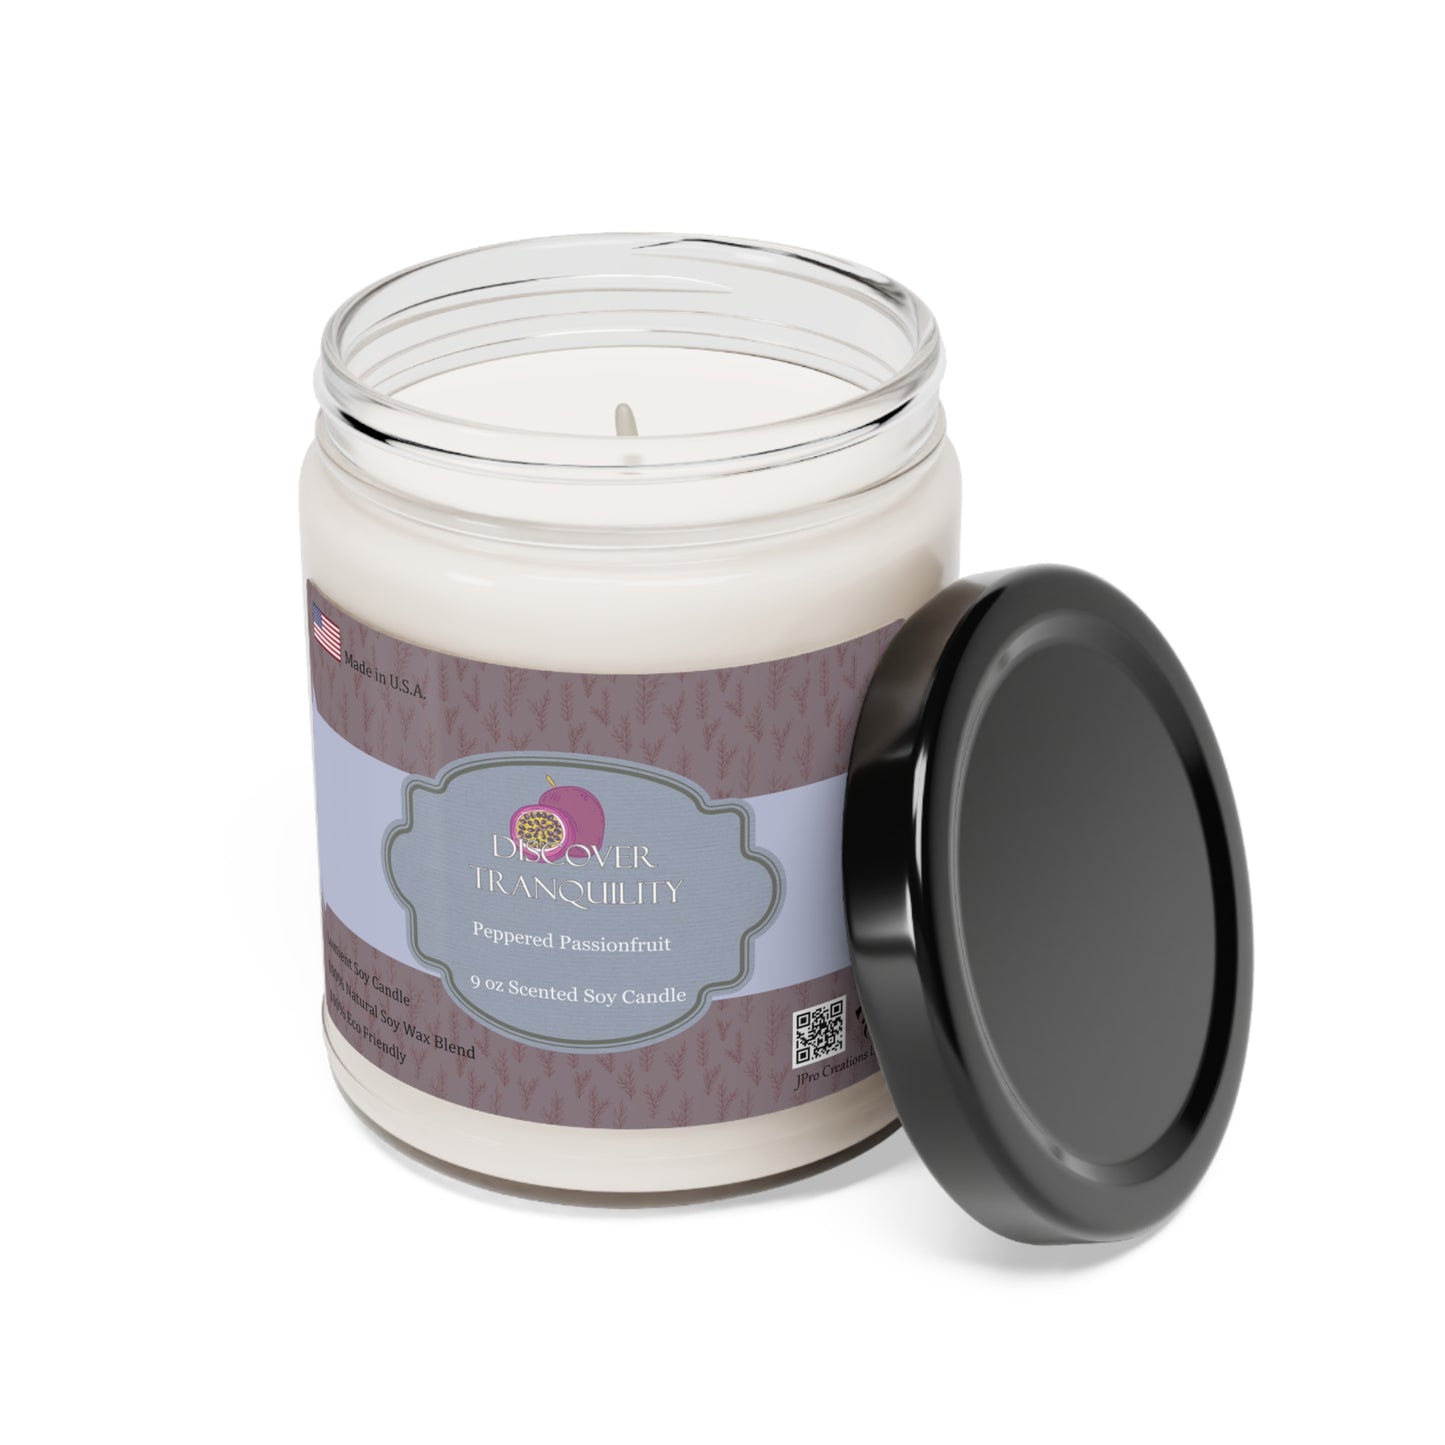 Discover Tranquility Scented Soy Candle, 9oz